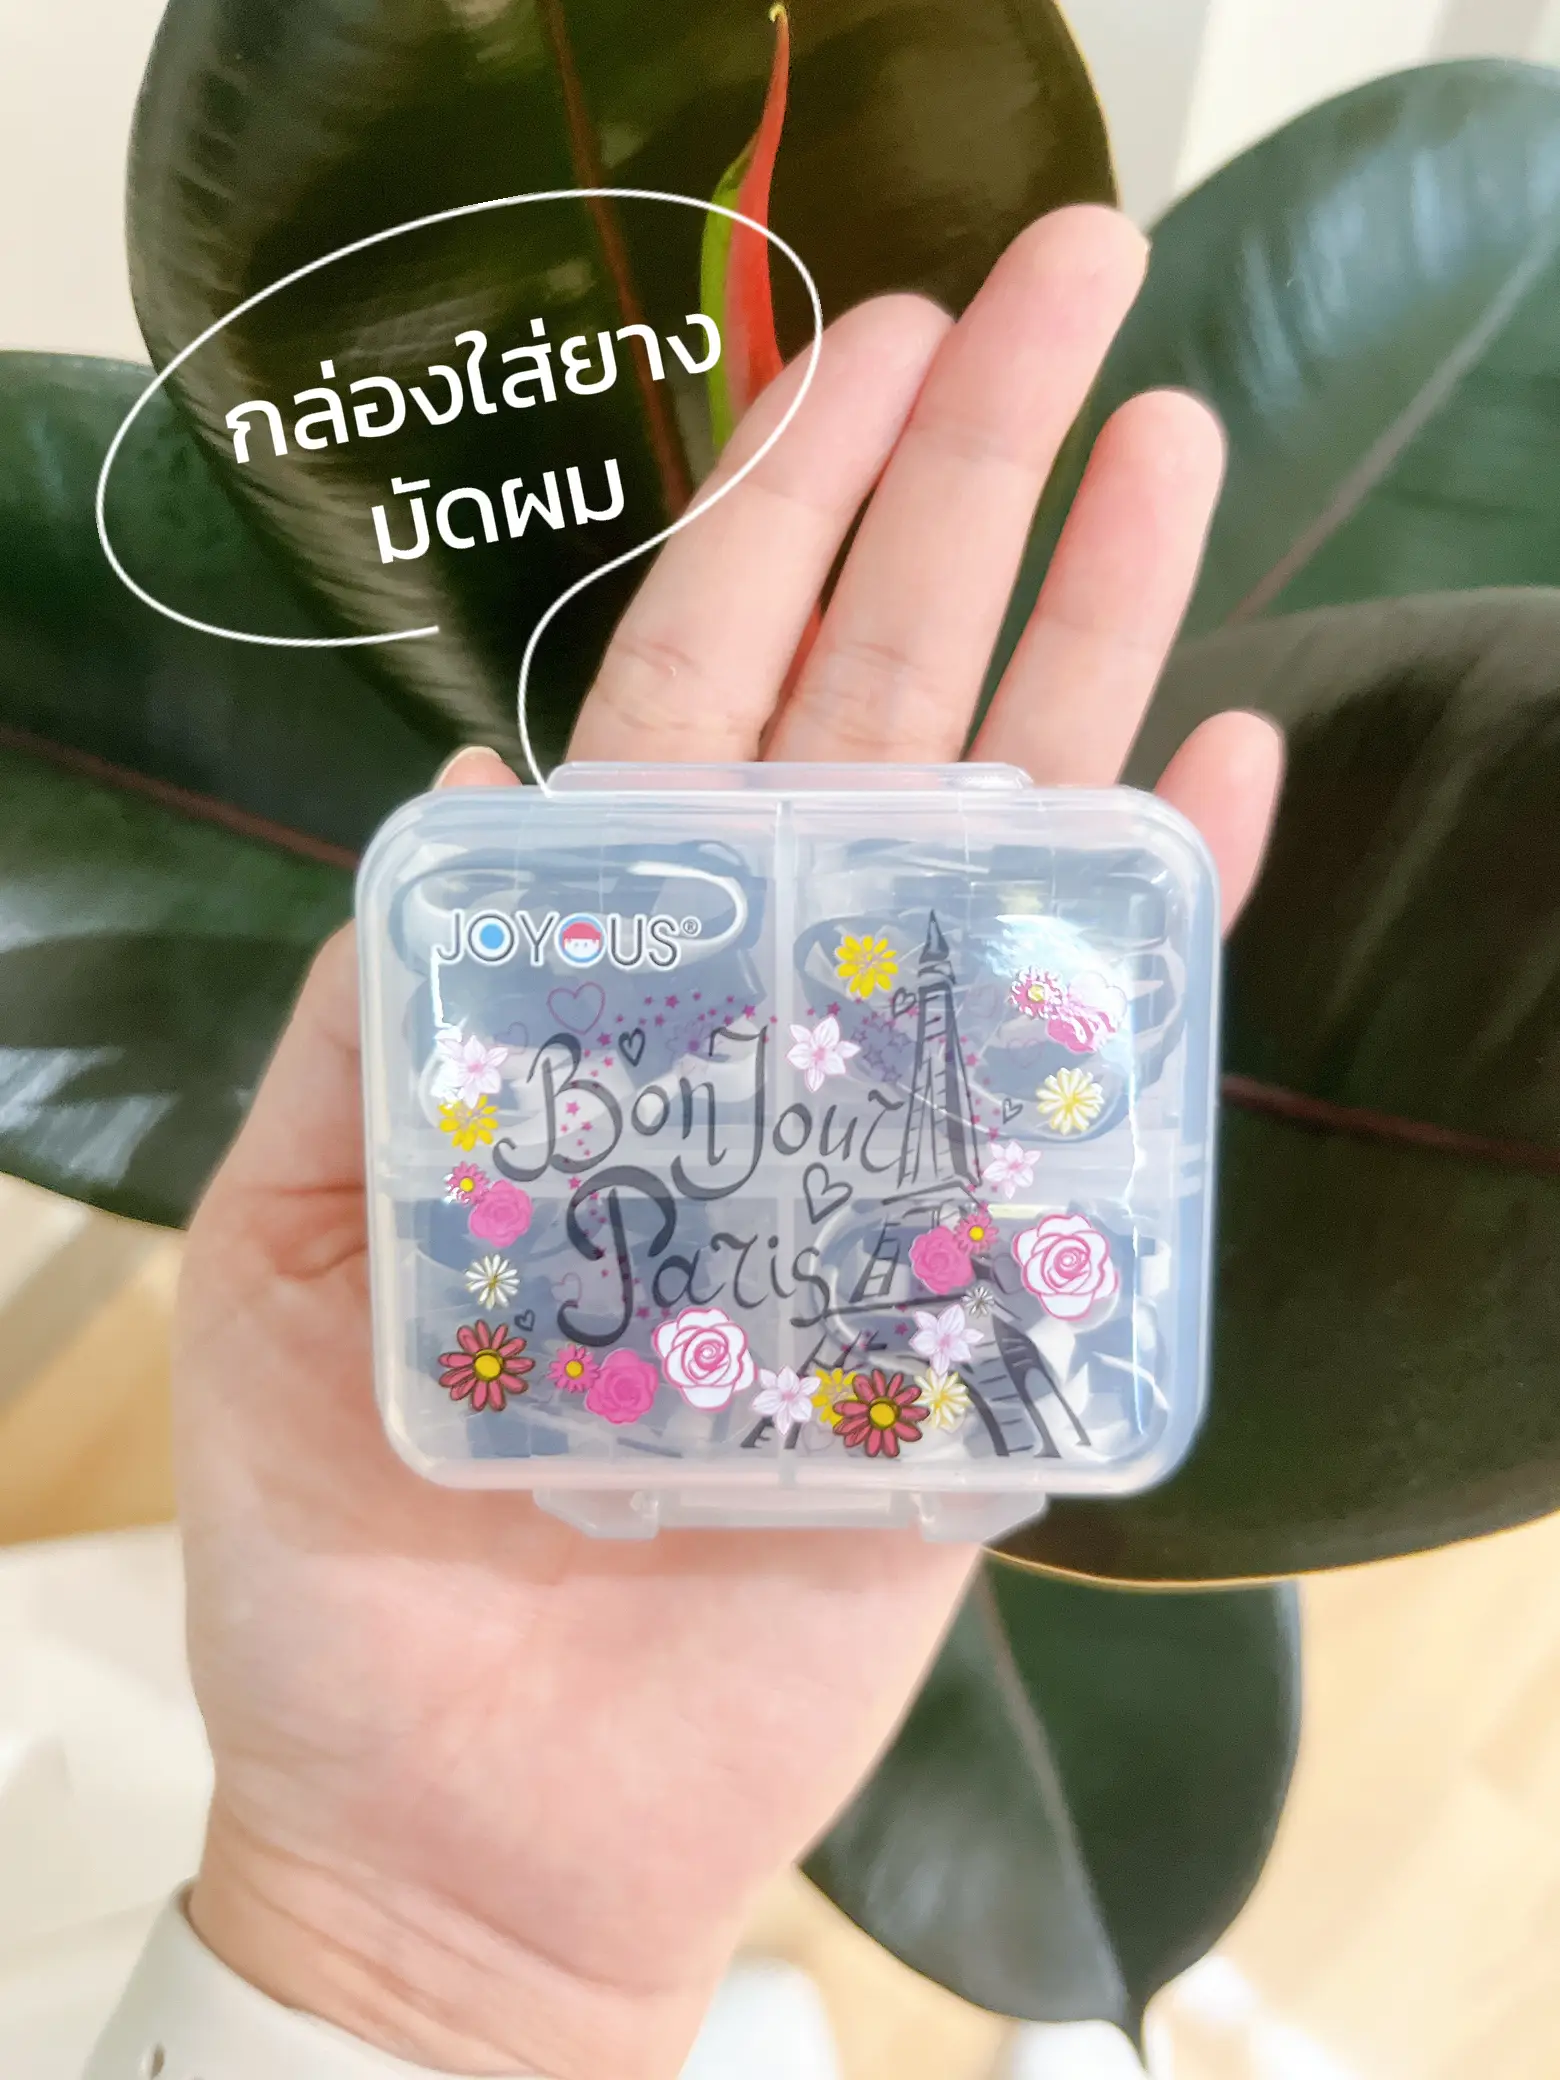 Hair tie box, Gallery posted by คะแนน